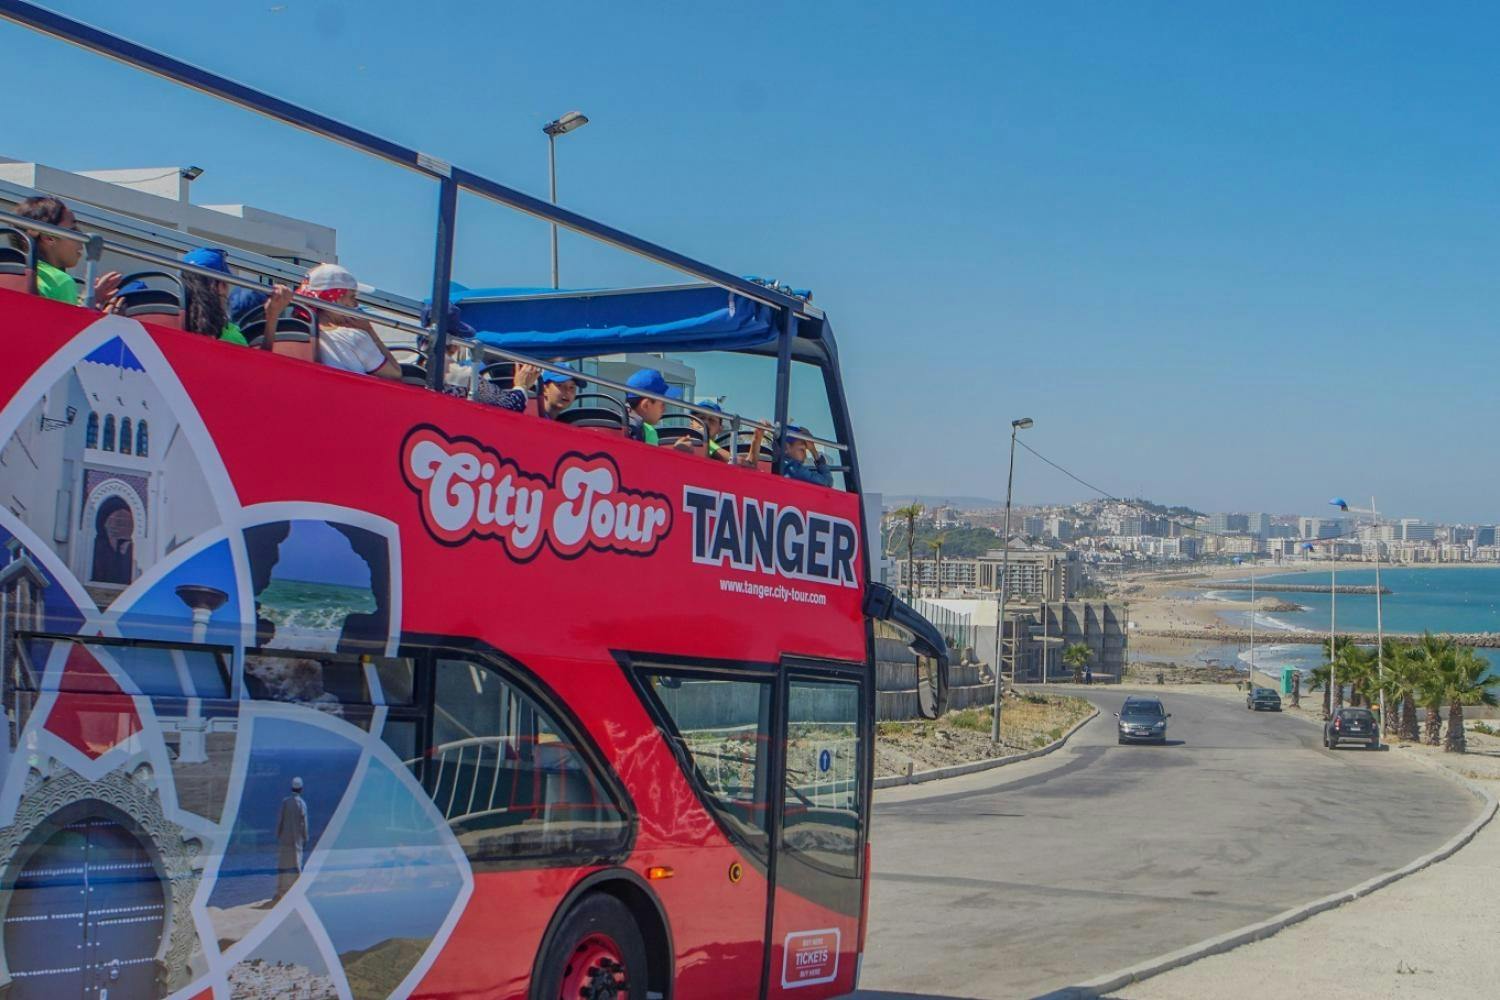 48 hour pass for a hop on off bus tour of Tangier